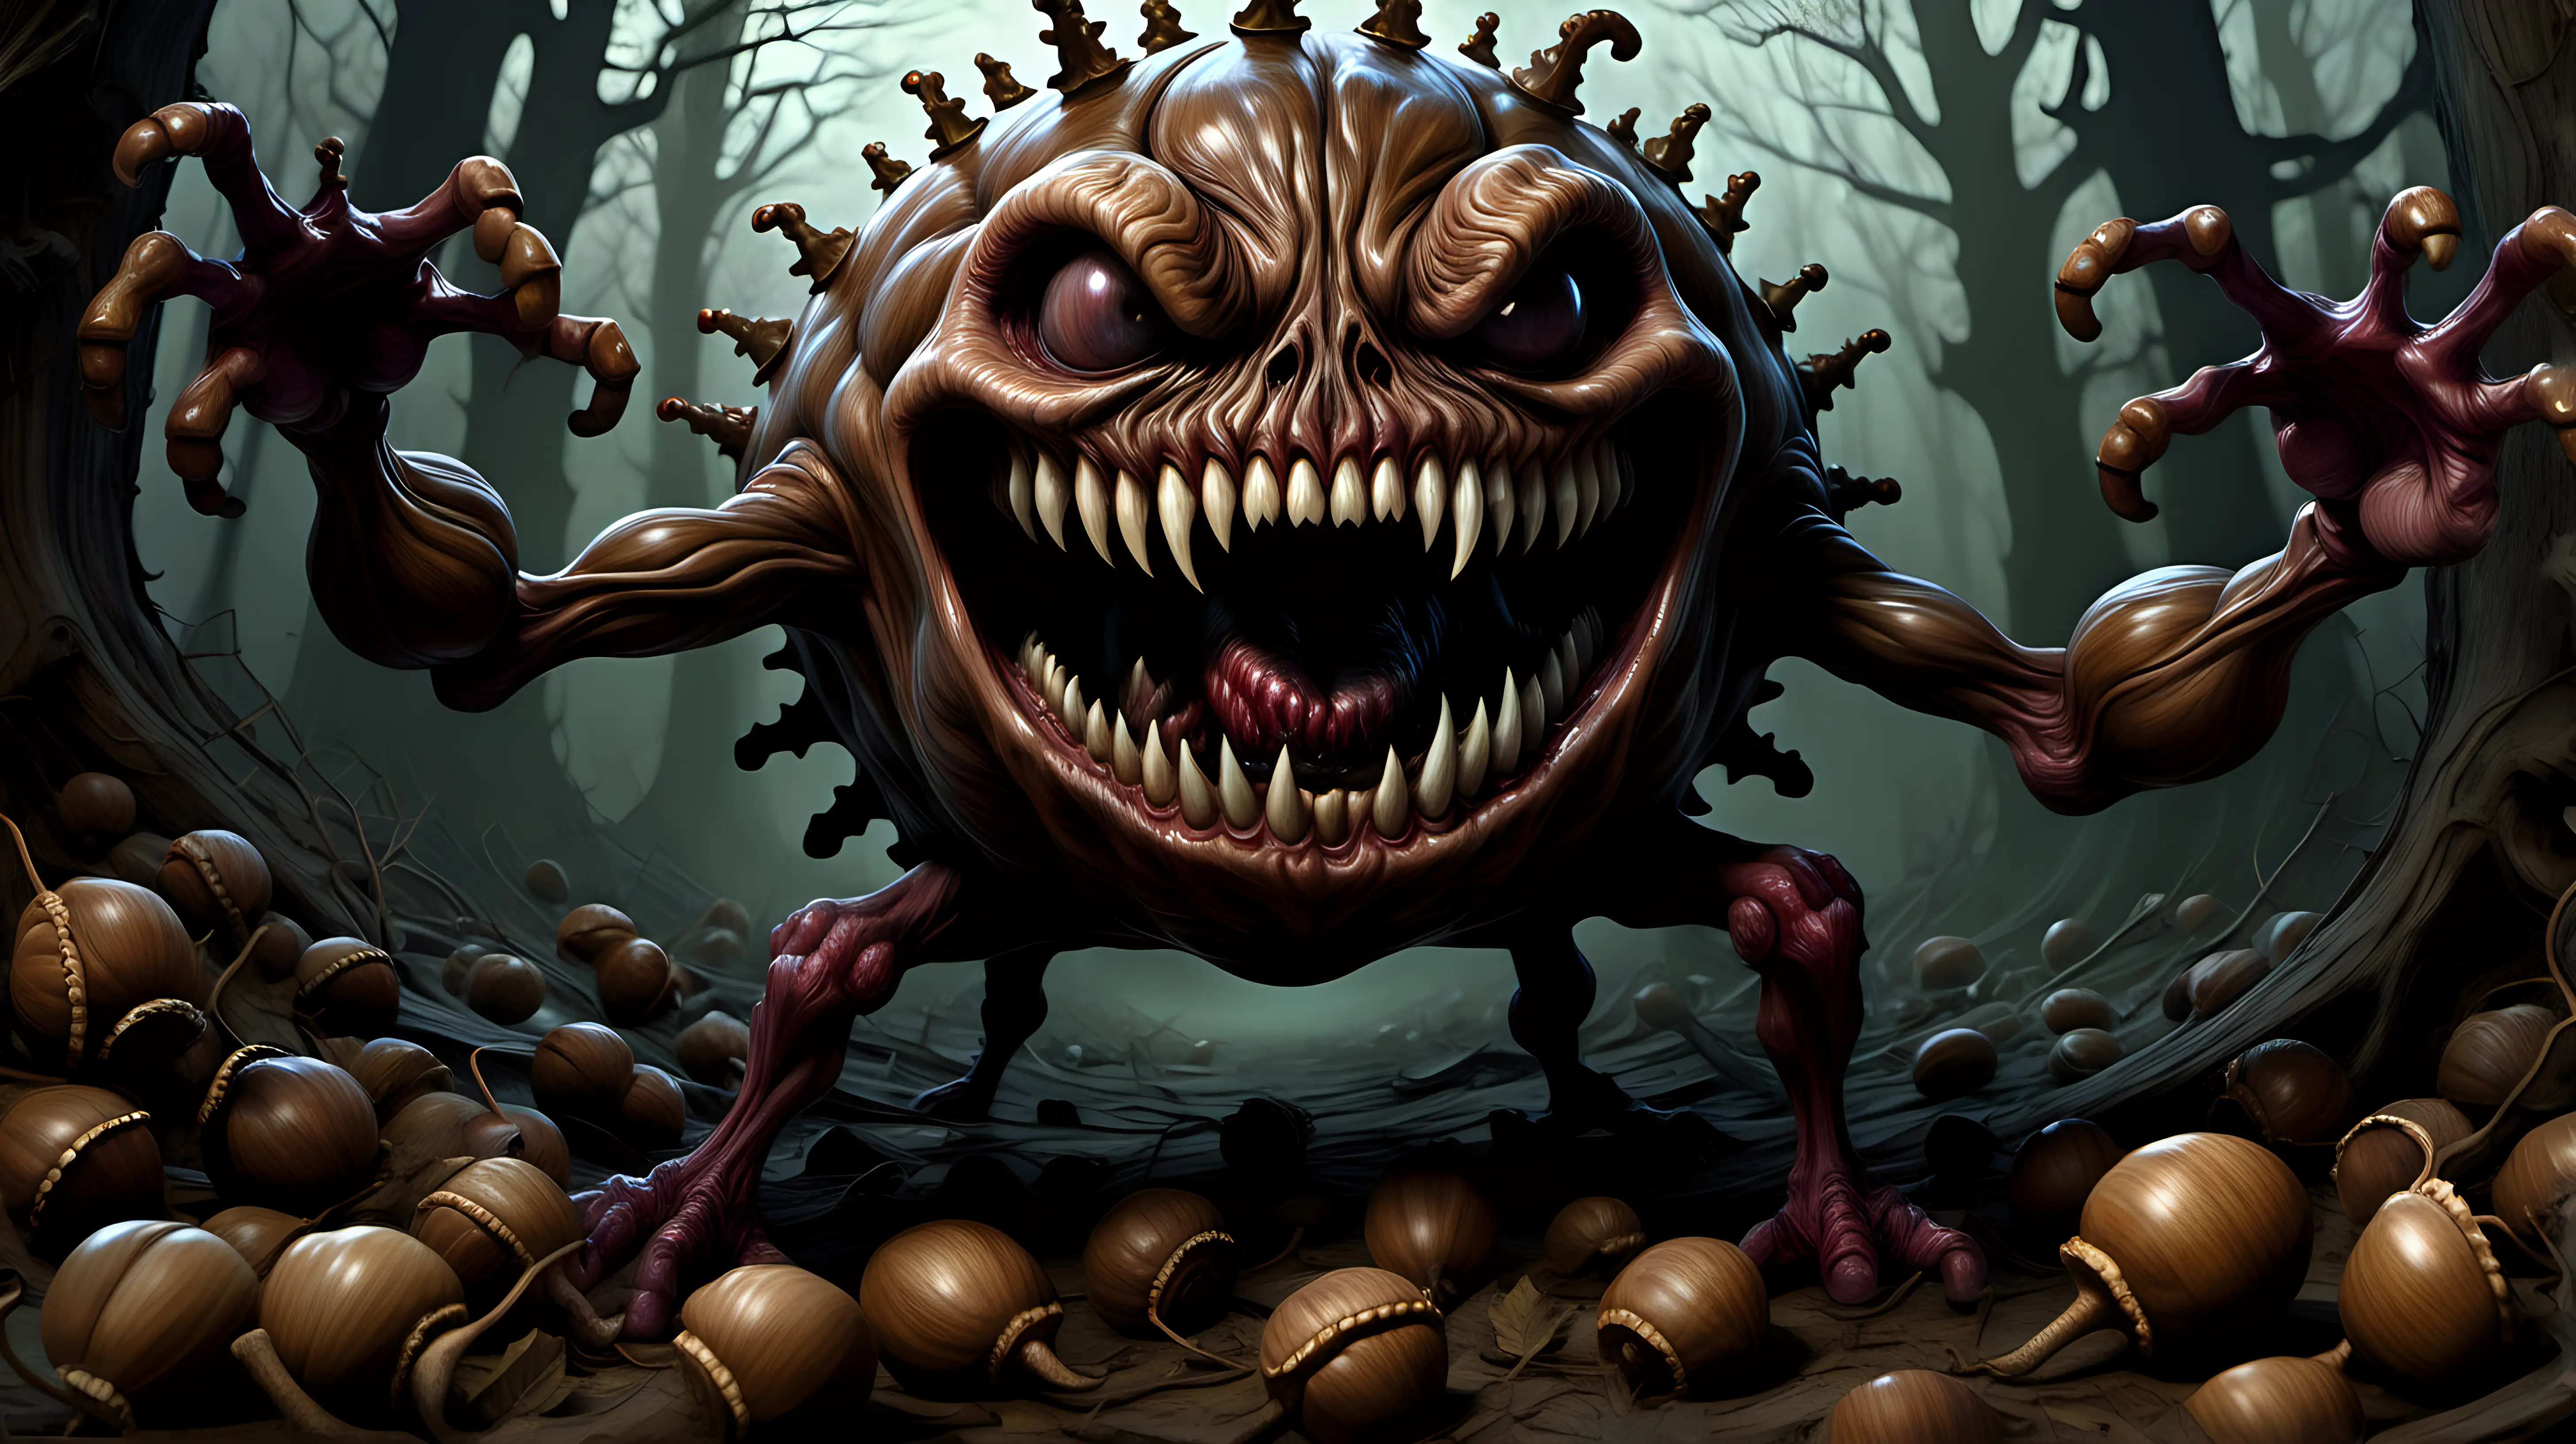 fantasy art, a walnut with arms and legs, gaping huge maw with acorns as teeth, trippy, surreal, gothic horror